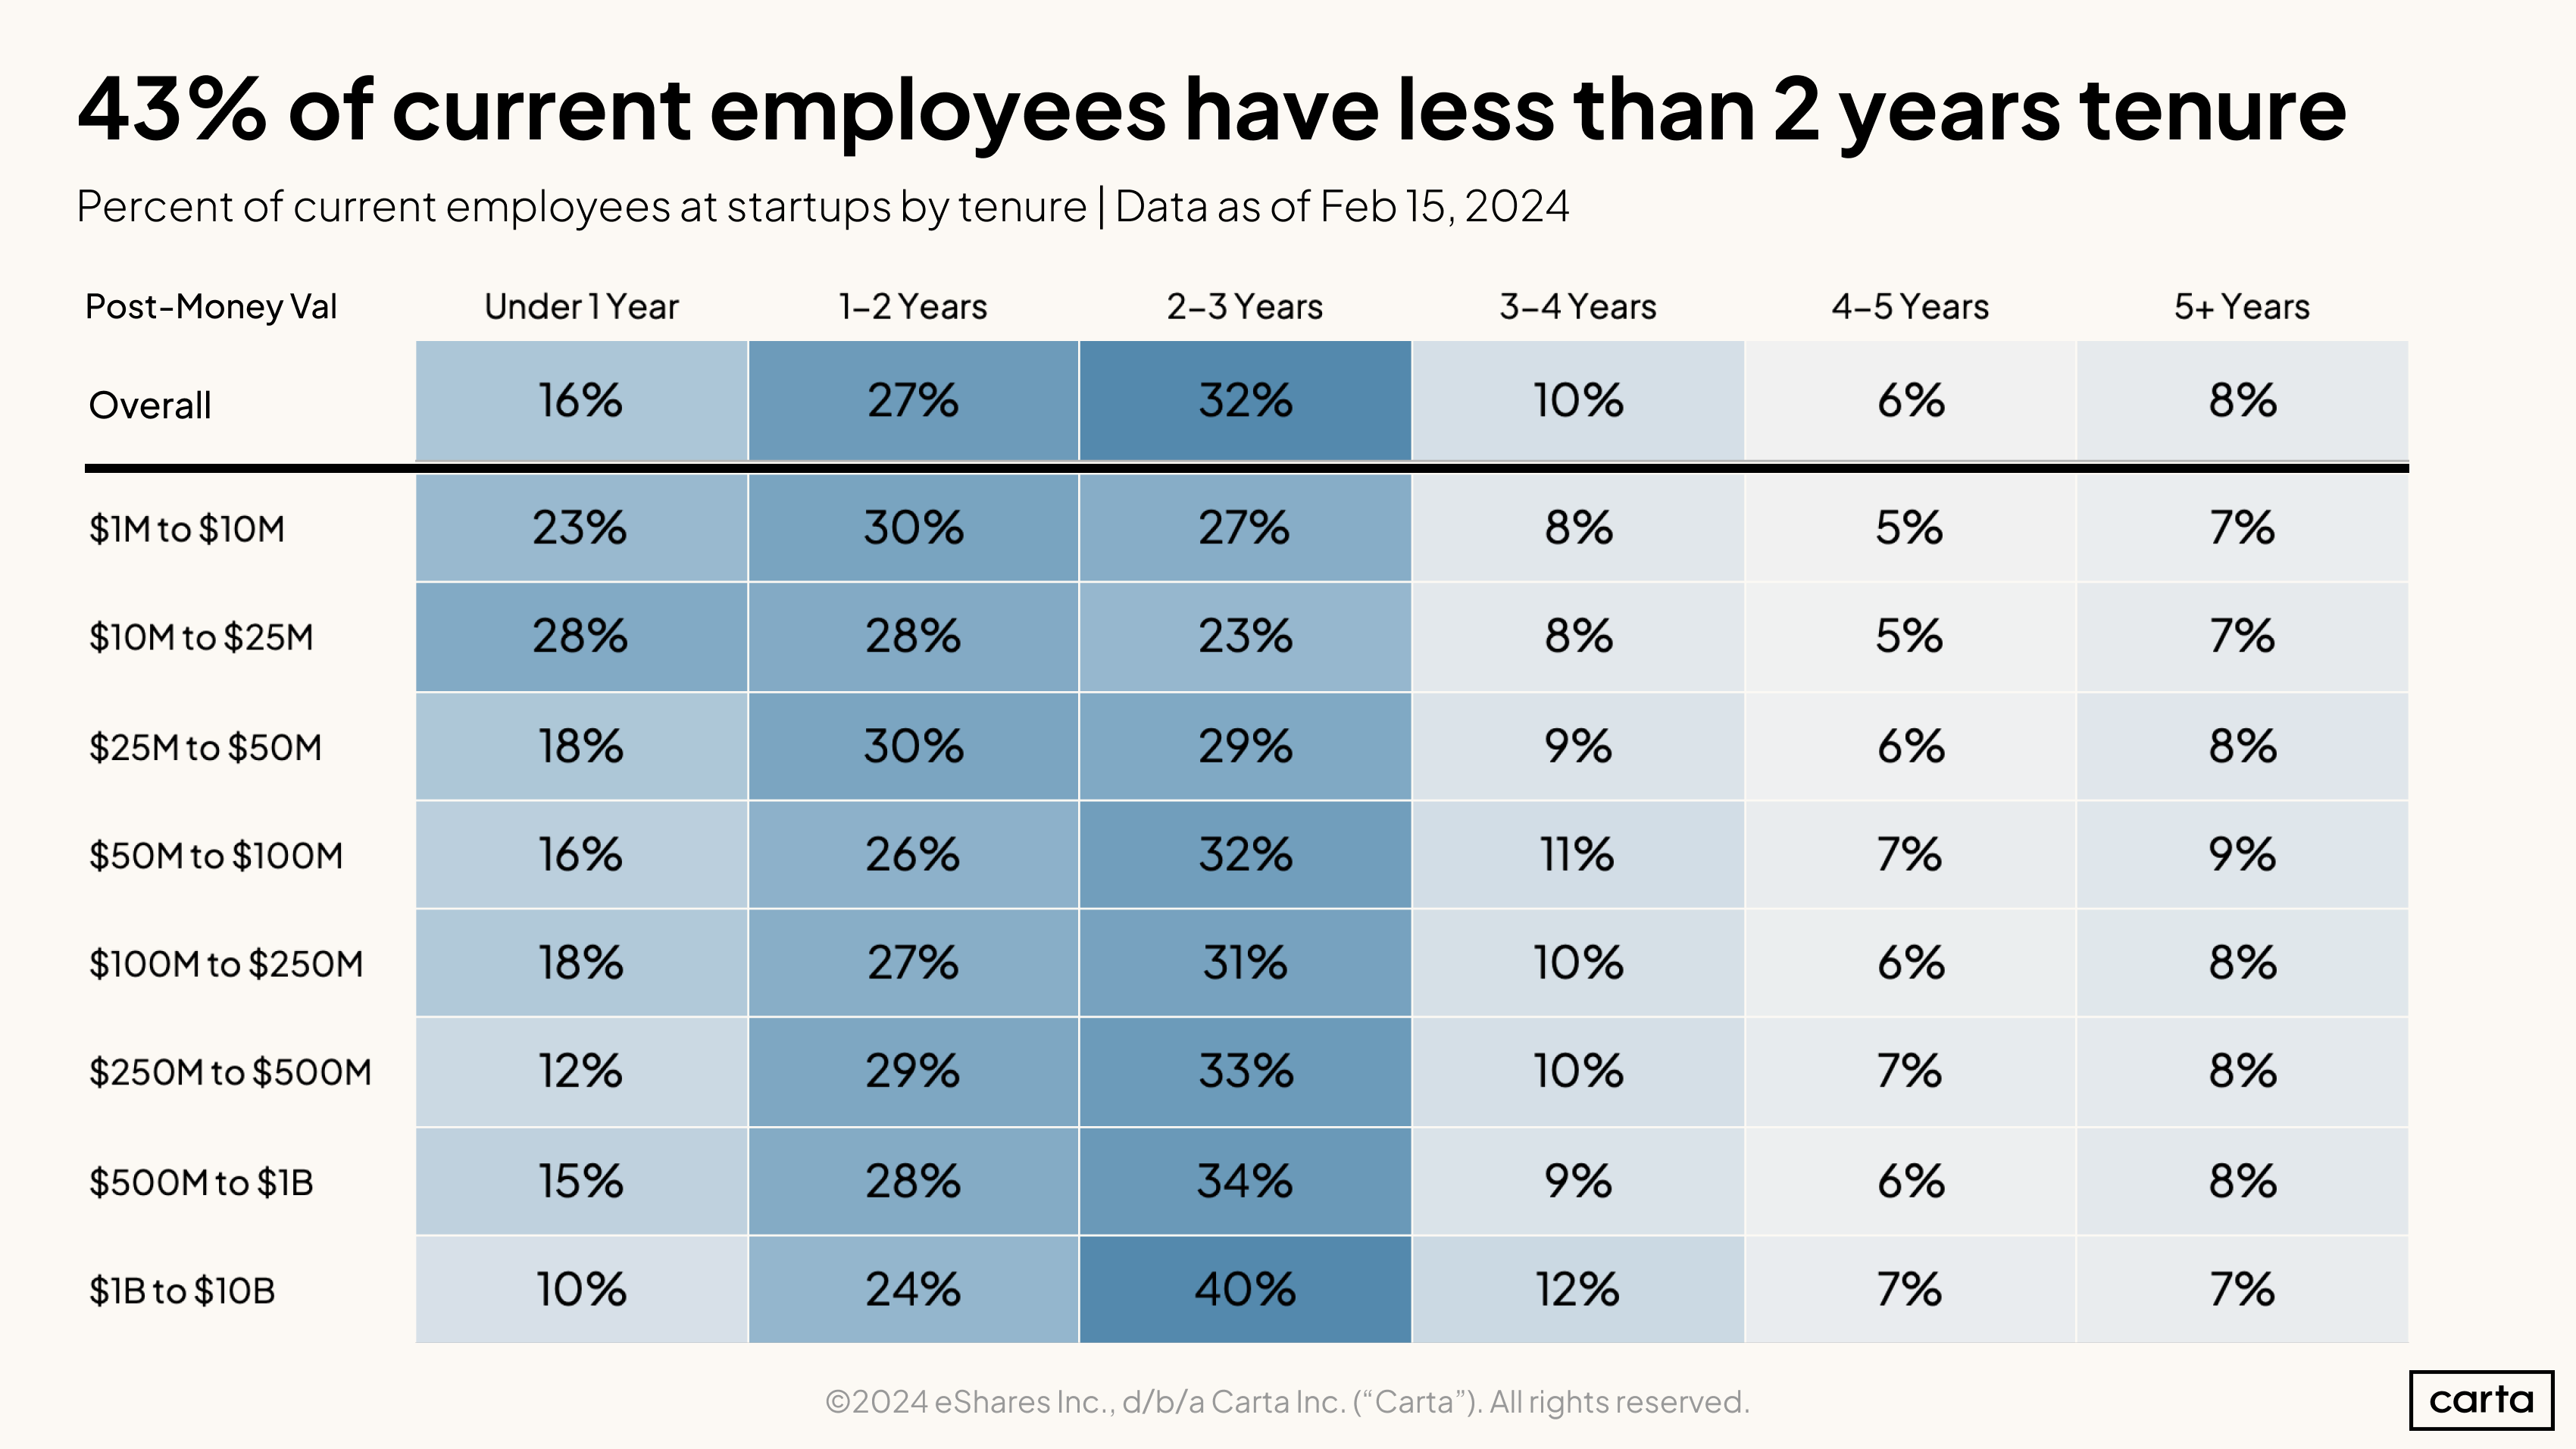 43 percent of current employees have less than 2 years tenure